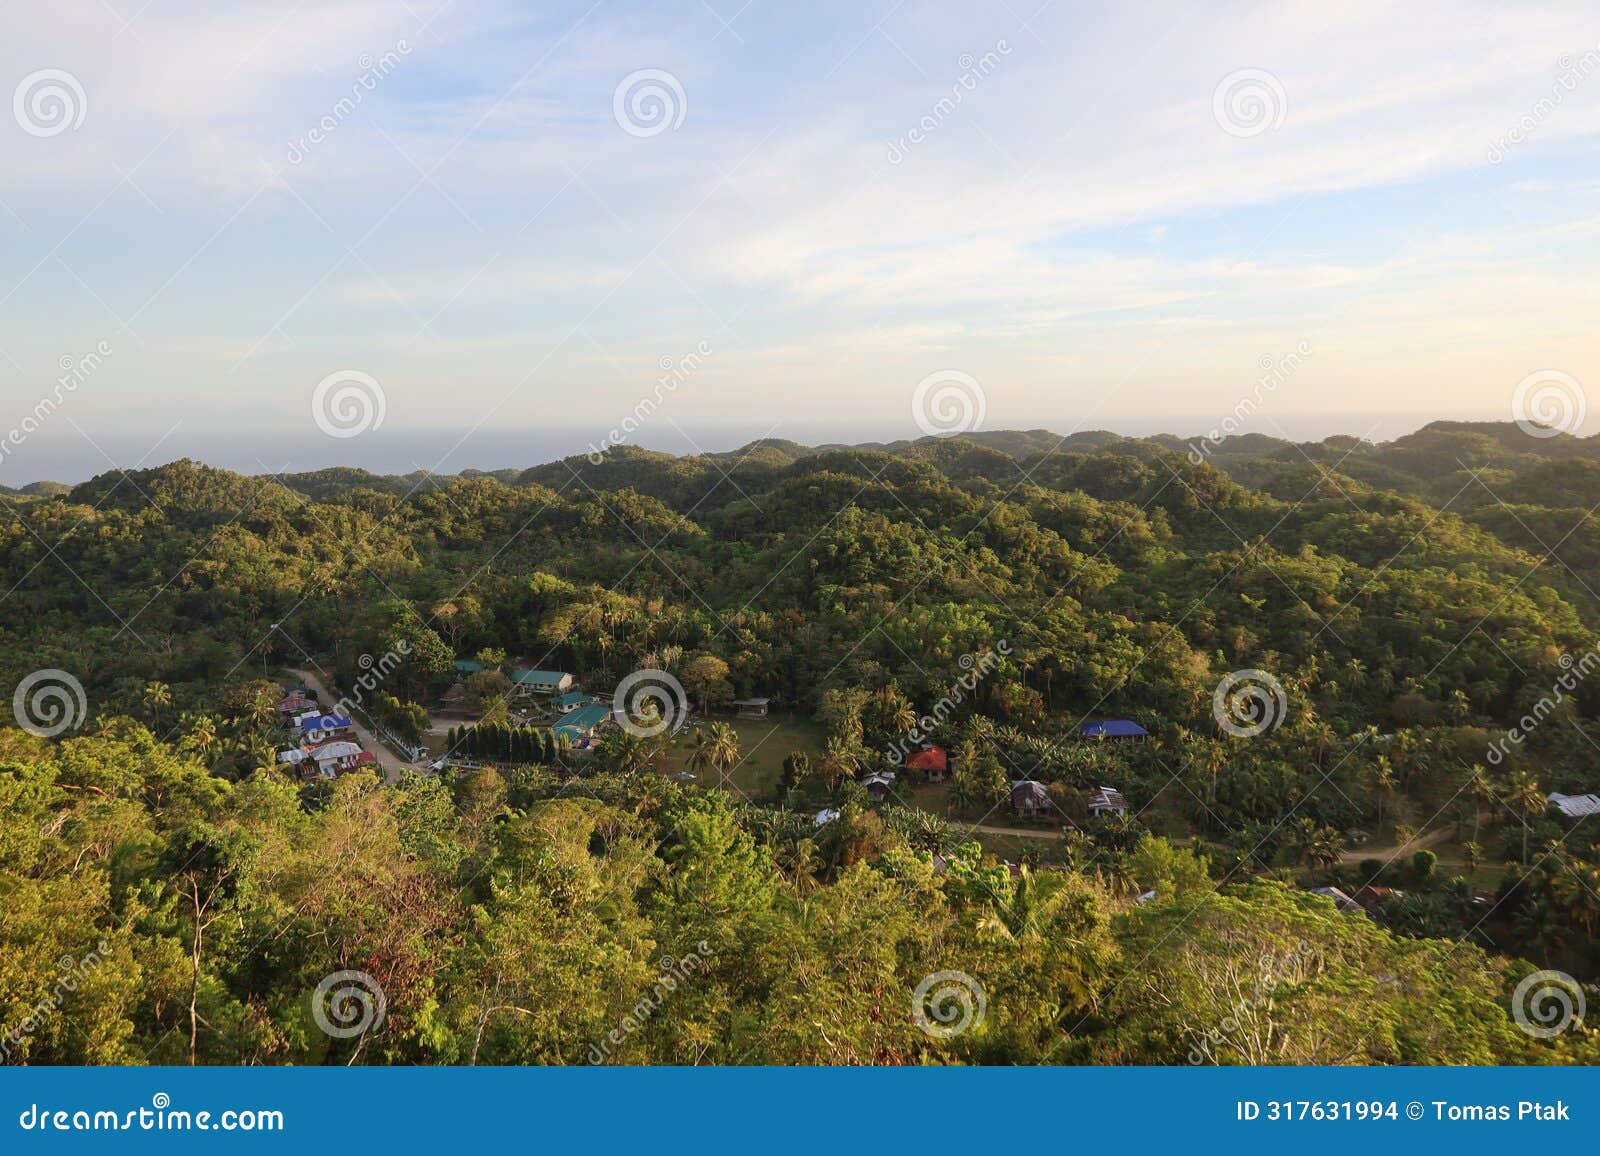 aerial sunset view of anda in bohol island, philippines